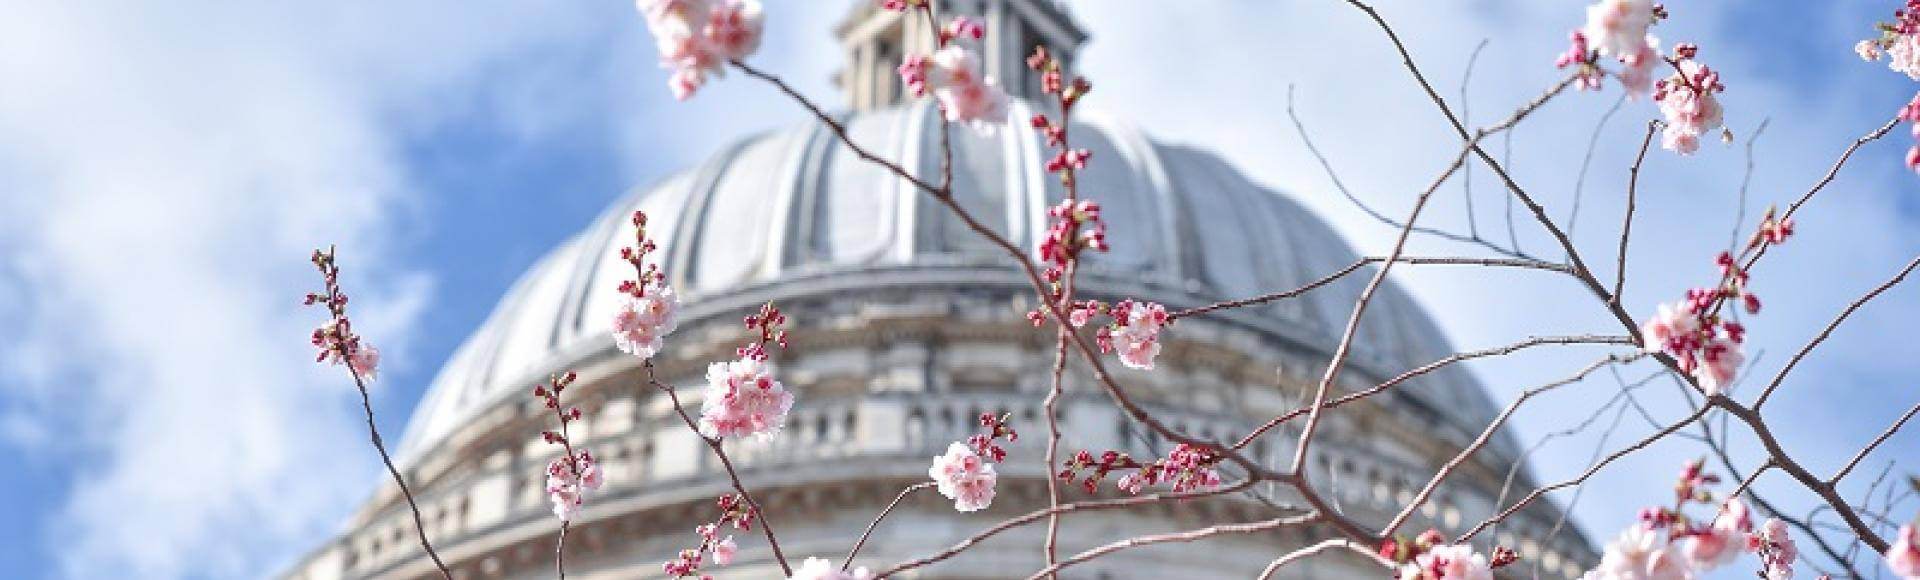 The dome of St Paul's with blossom in the foreground